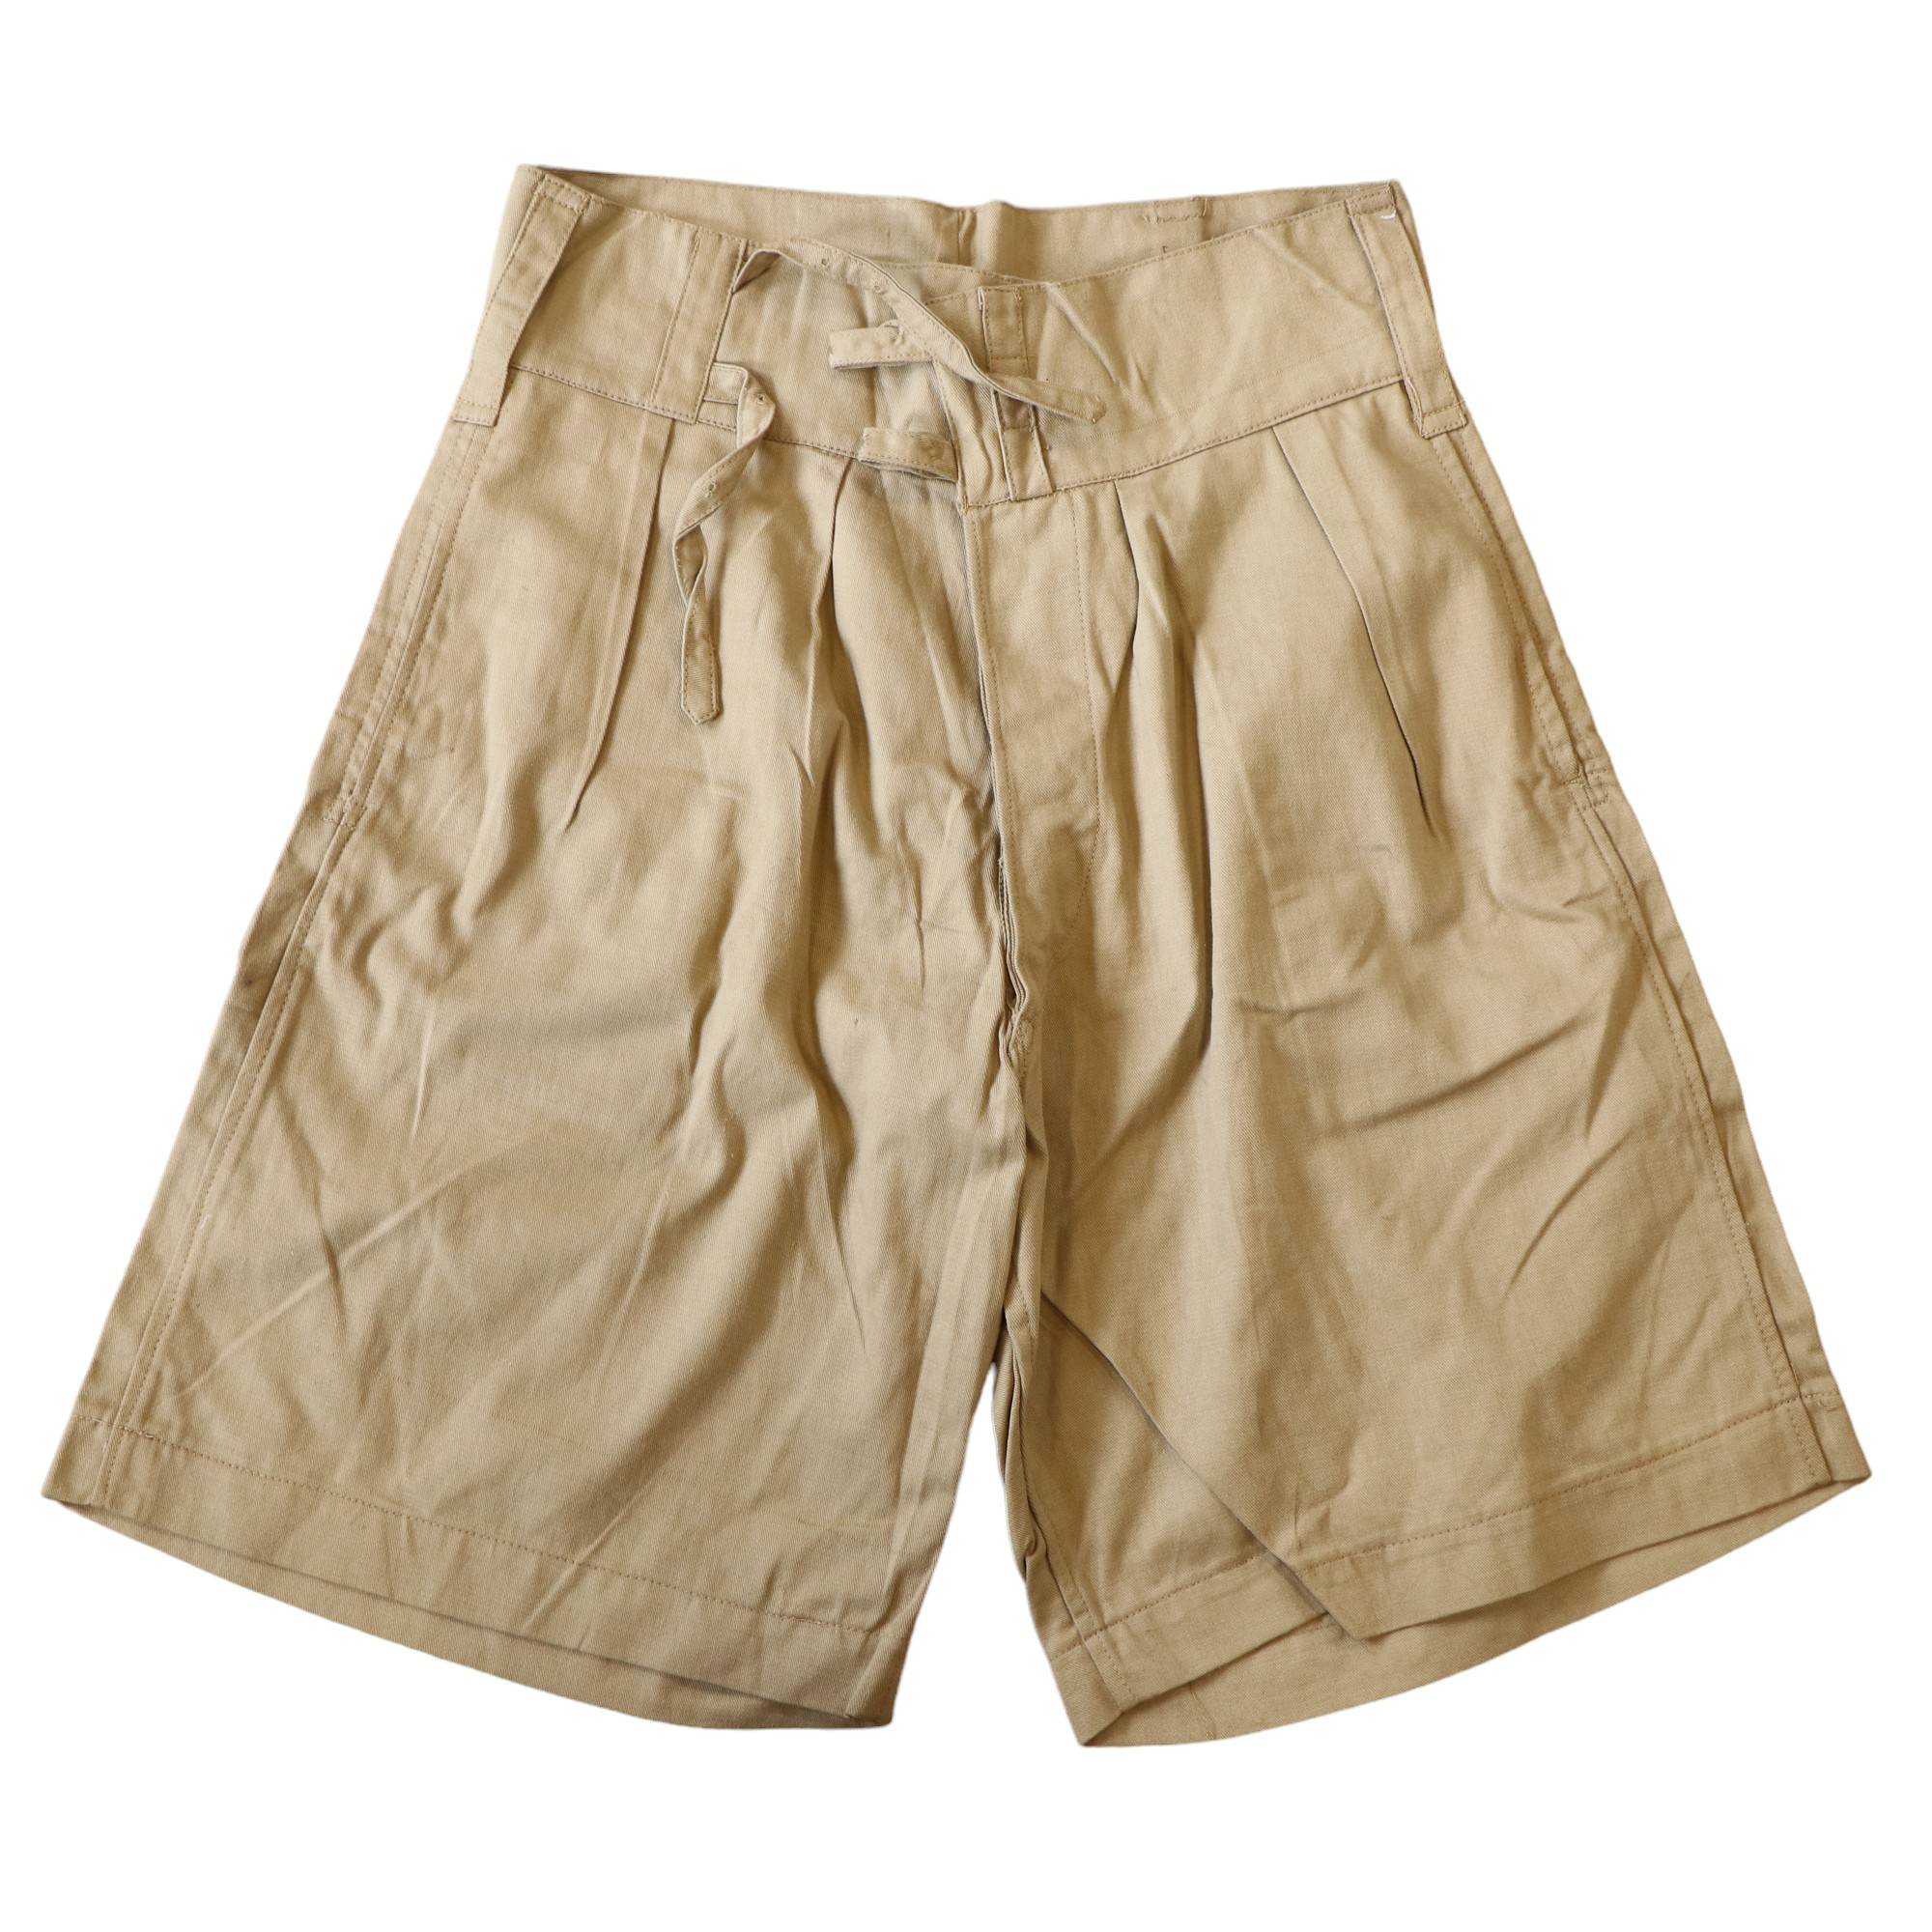 A 1942 dated pair of Indian-made khaki drill shorts